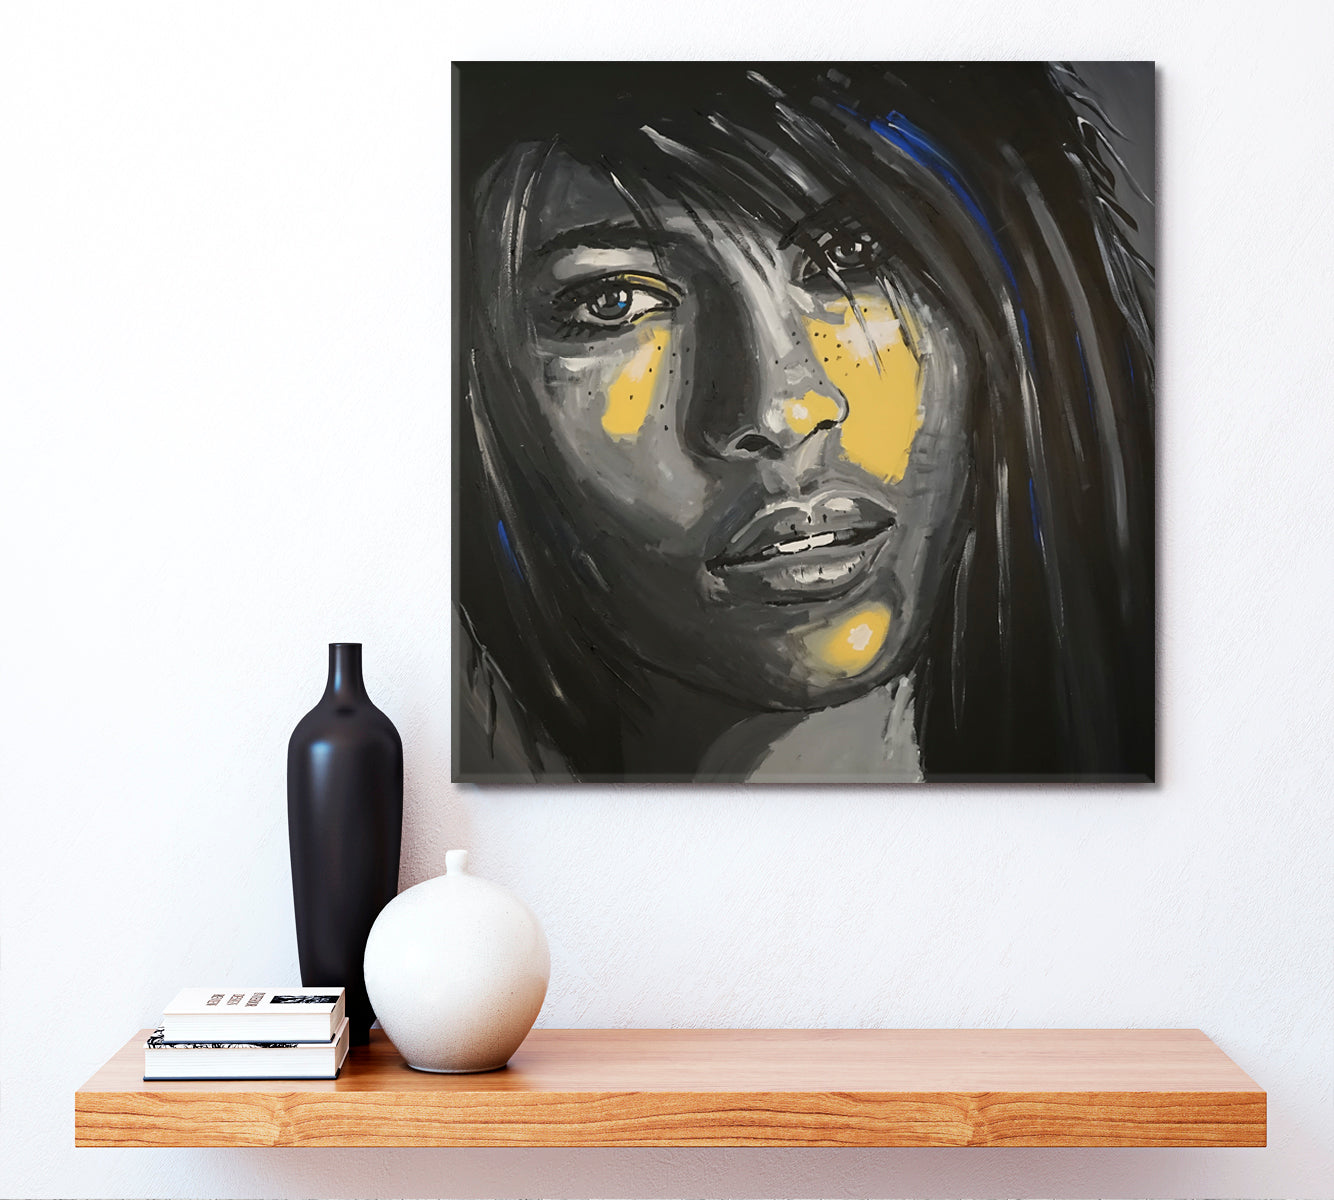 ABSTRACT REALISM Beautiful Woman Face Grunge Style Art | Square People Portrait Wall Hangings Artesty 1 Panel 12"x12" 